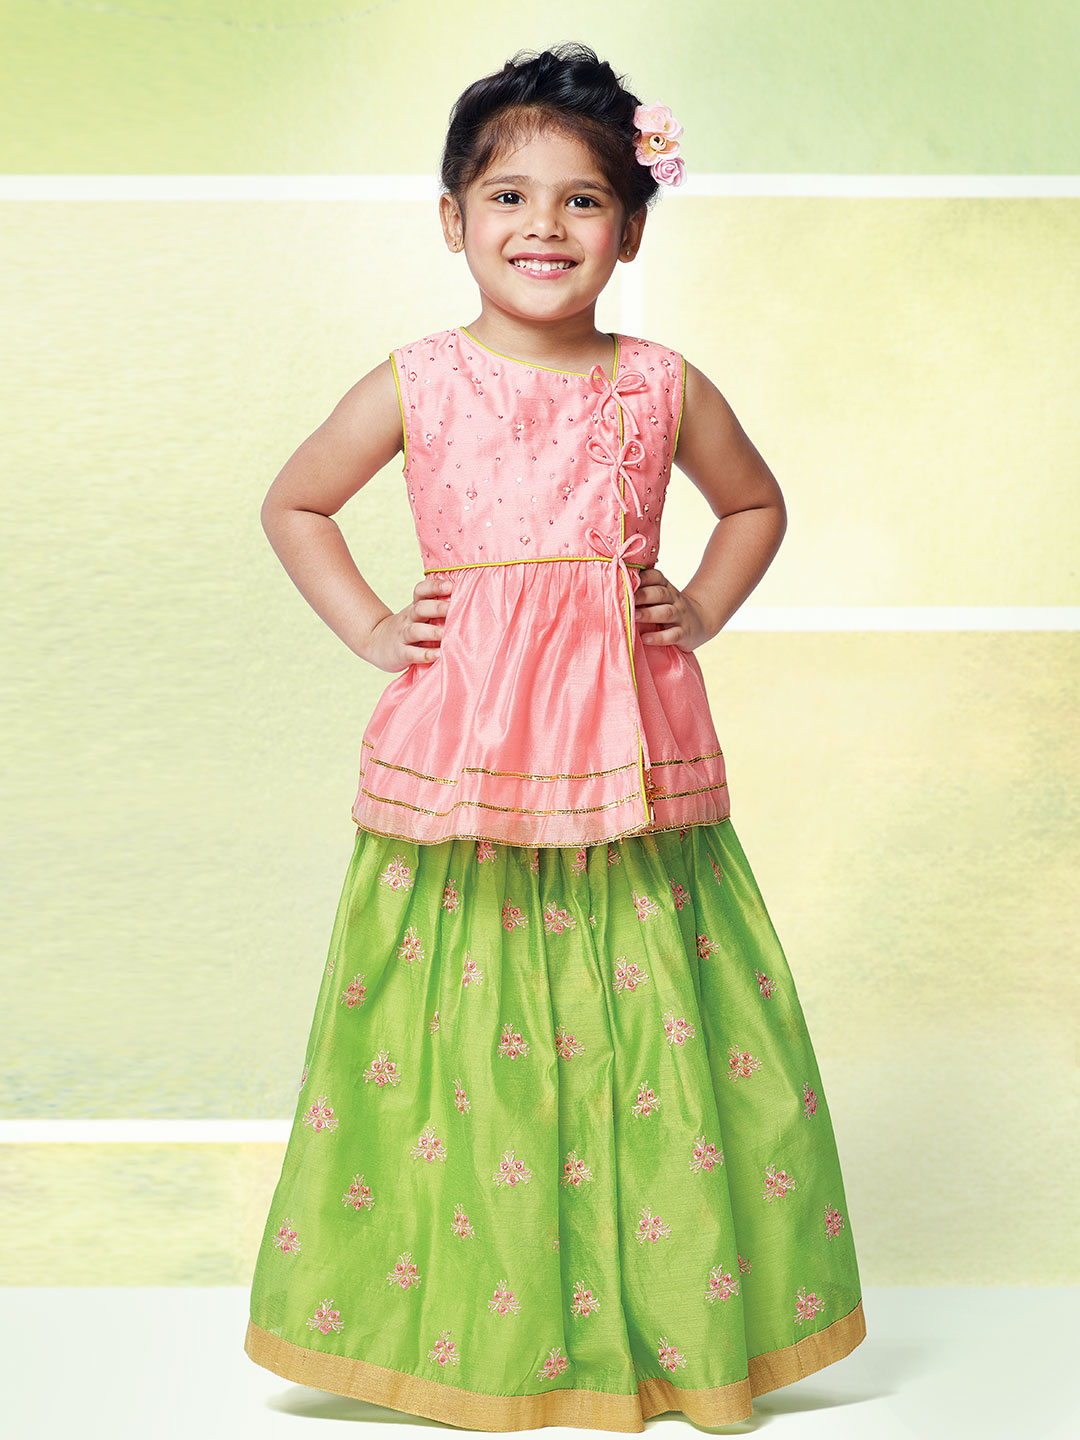 lacha dress for baby girl